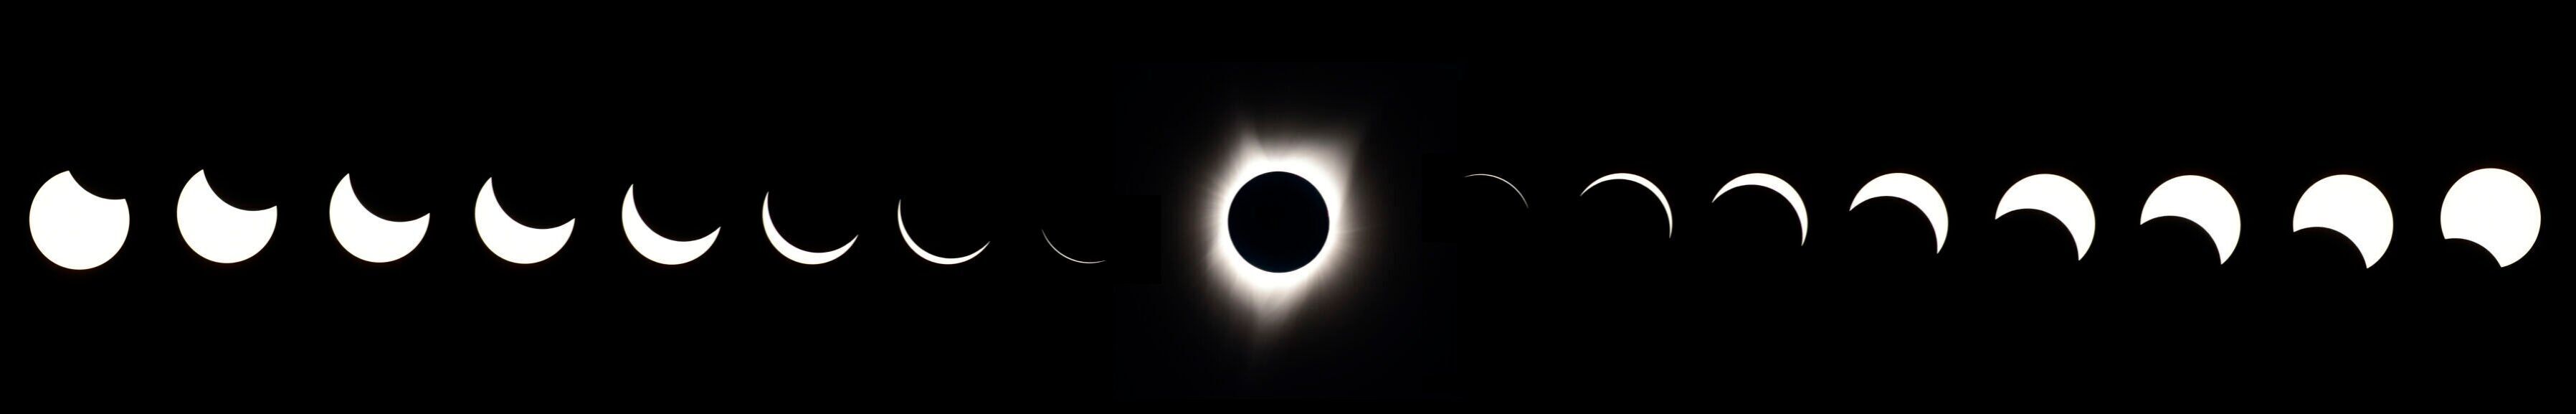 Rare 'ring of fire' solar eclipse: Hypnotizing pictures from across the  globe - CNET